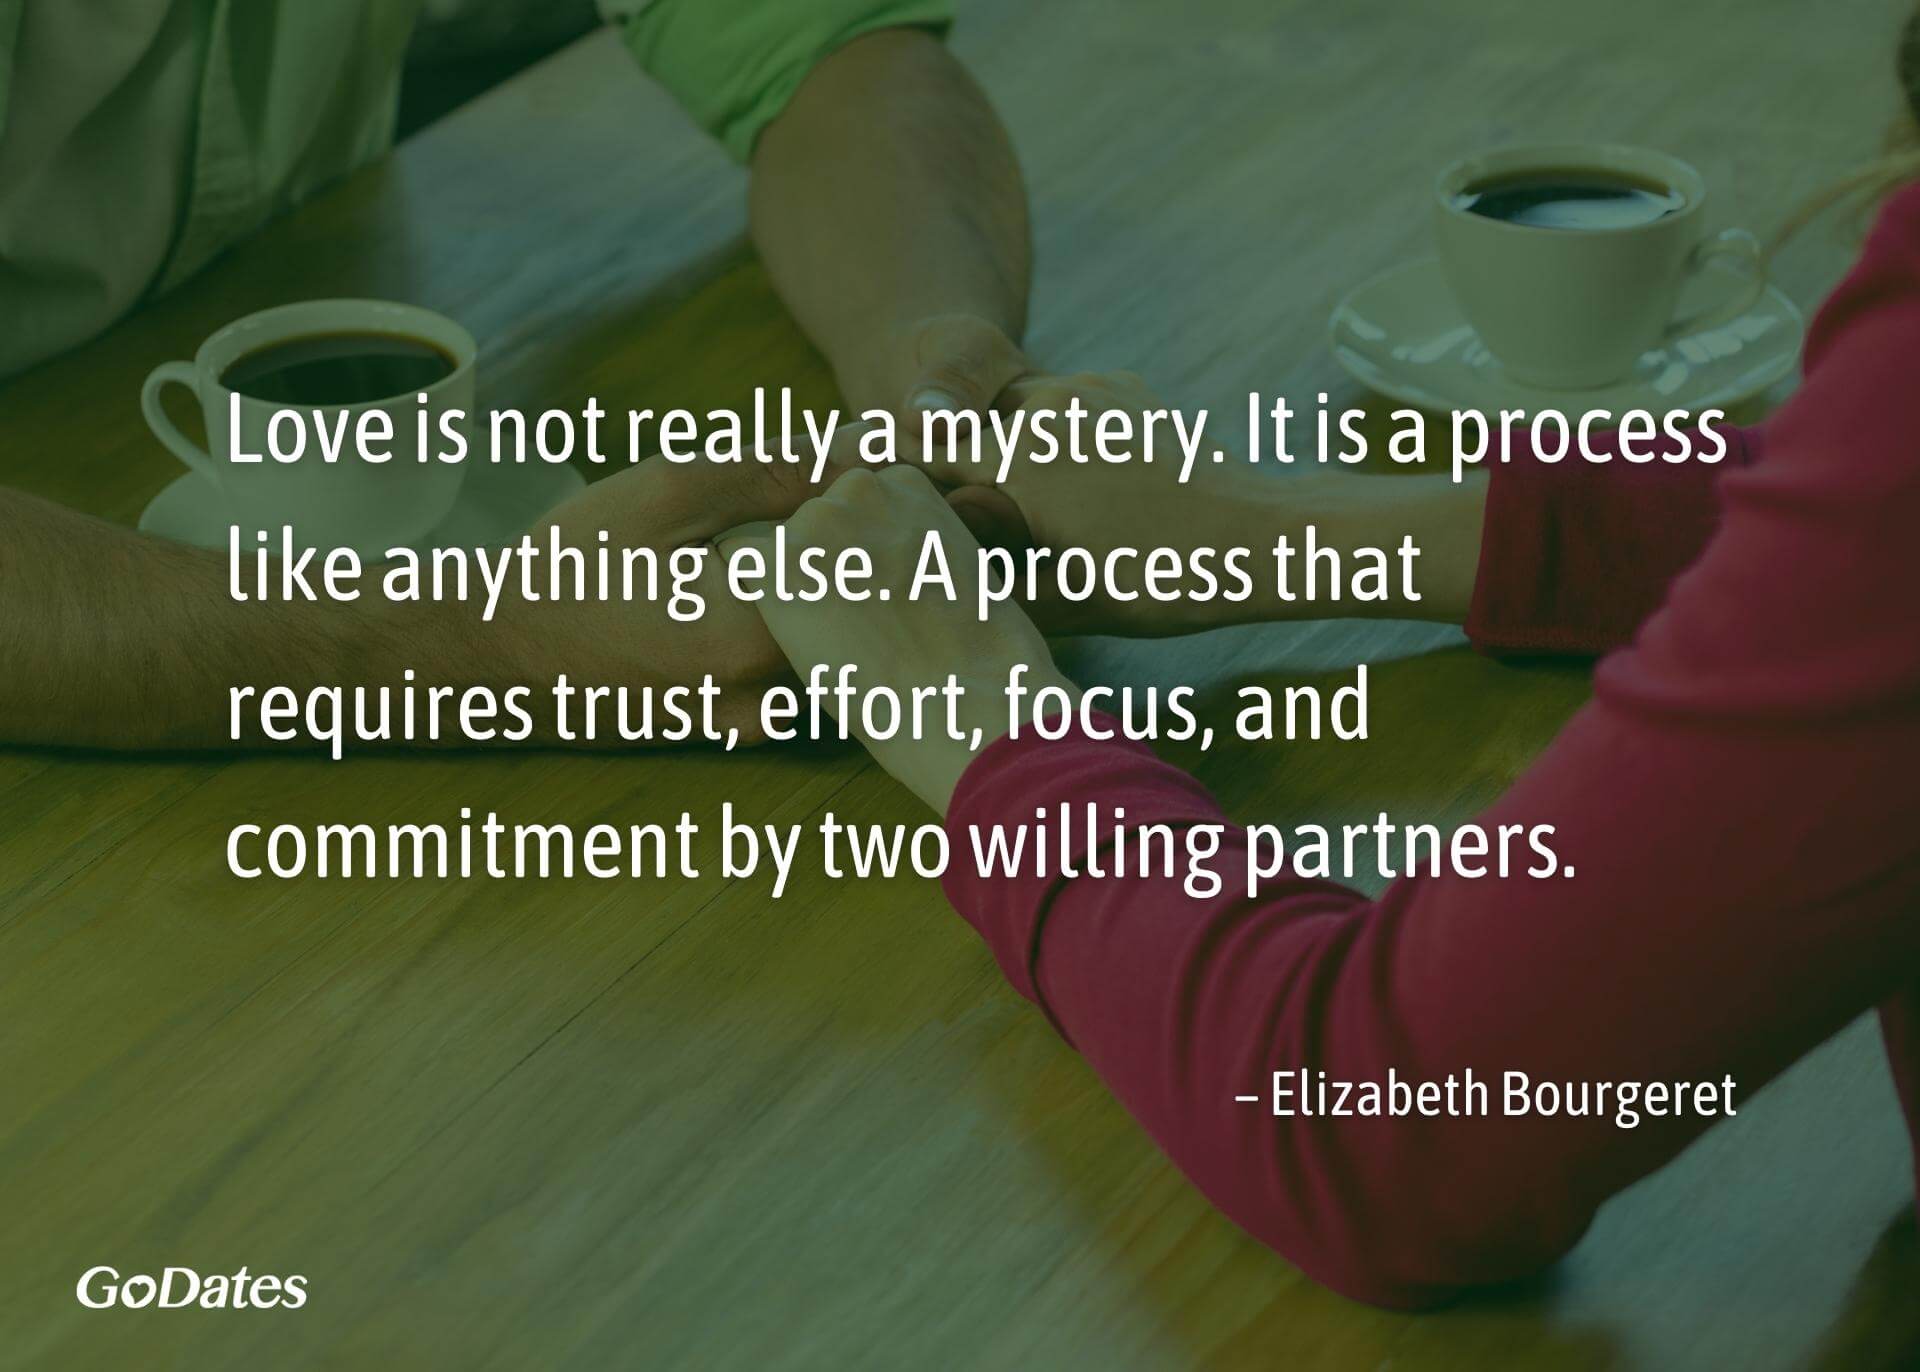 Love is a process quote